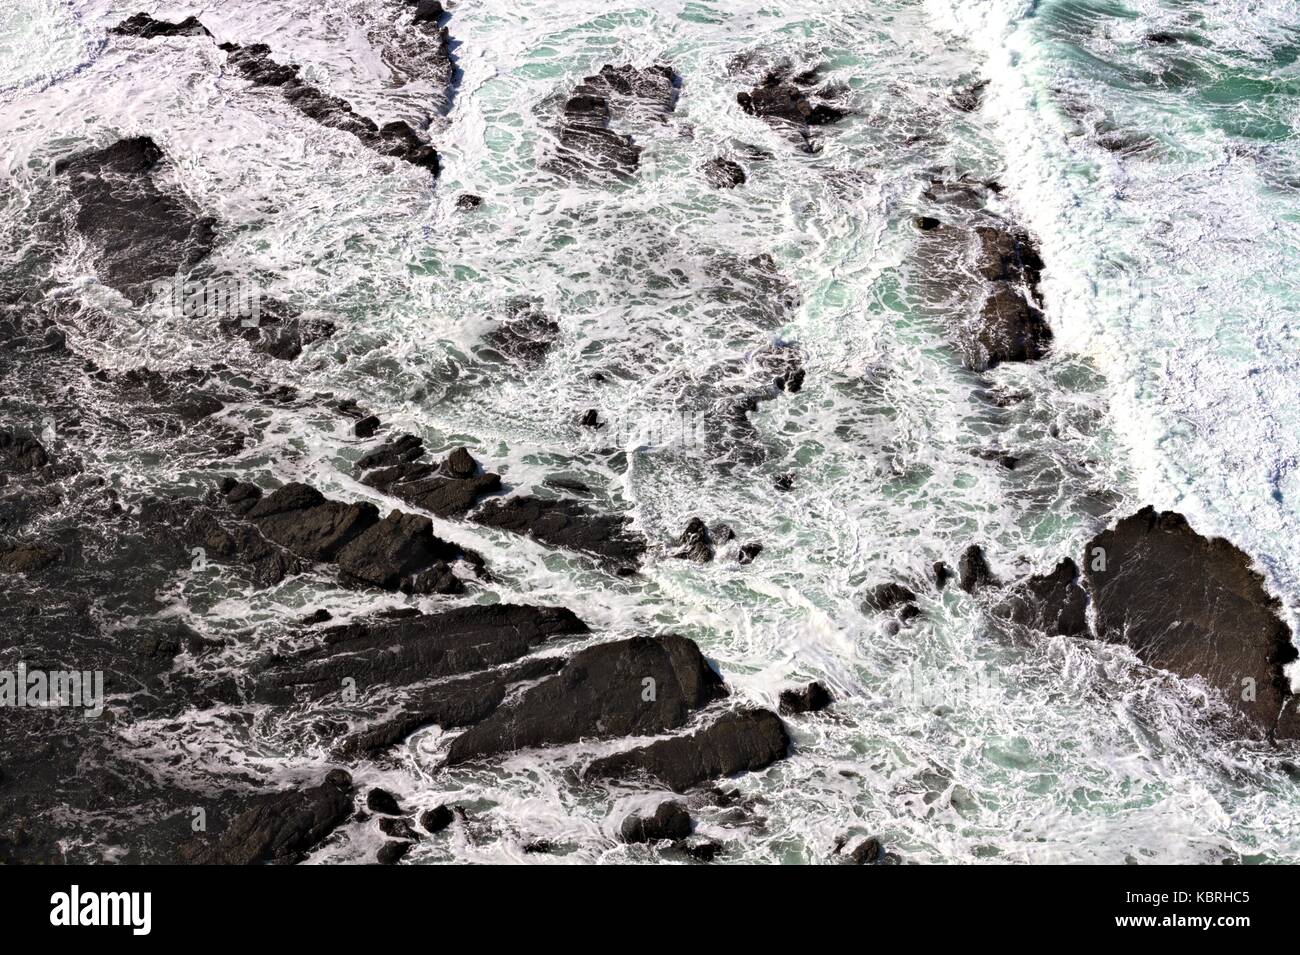 View from above of surf breaking over rocks. Stock Photo